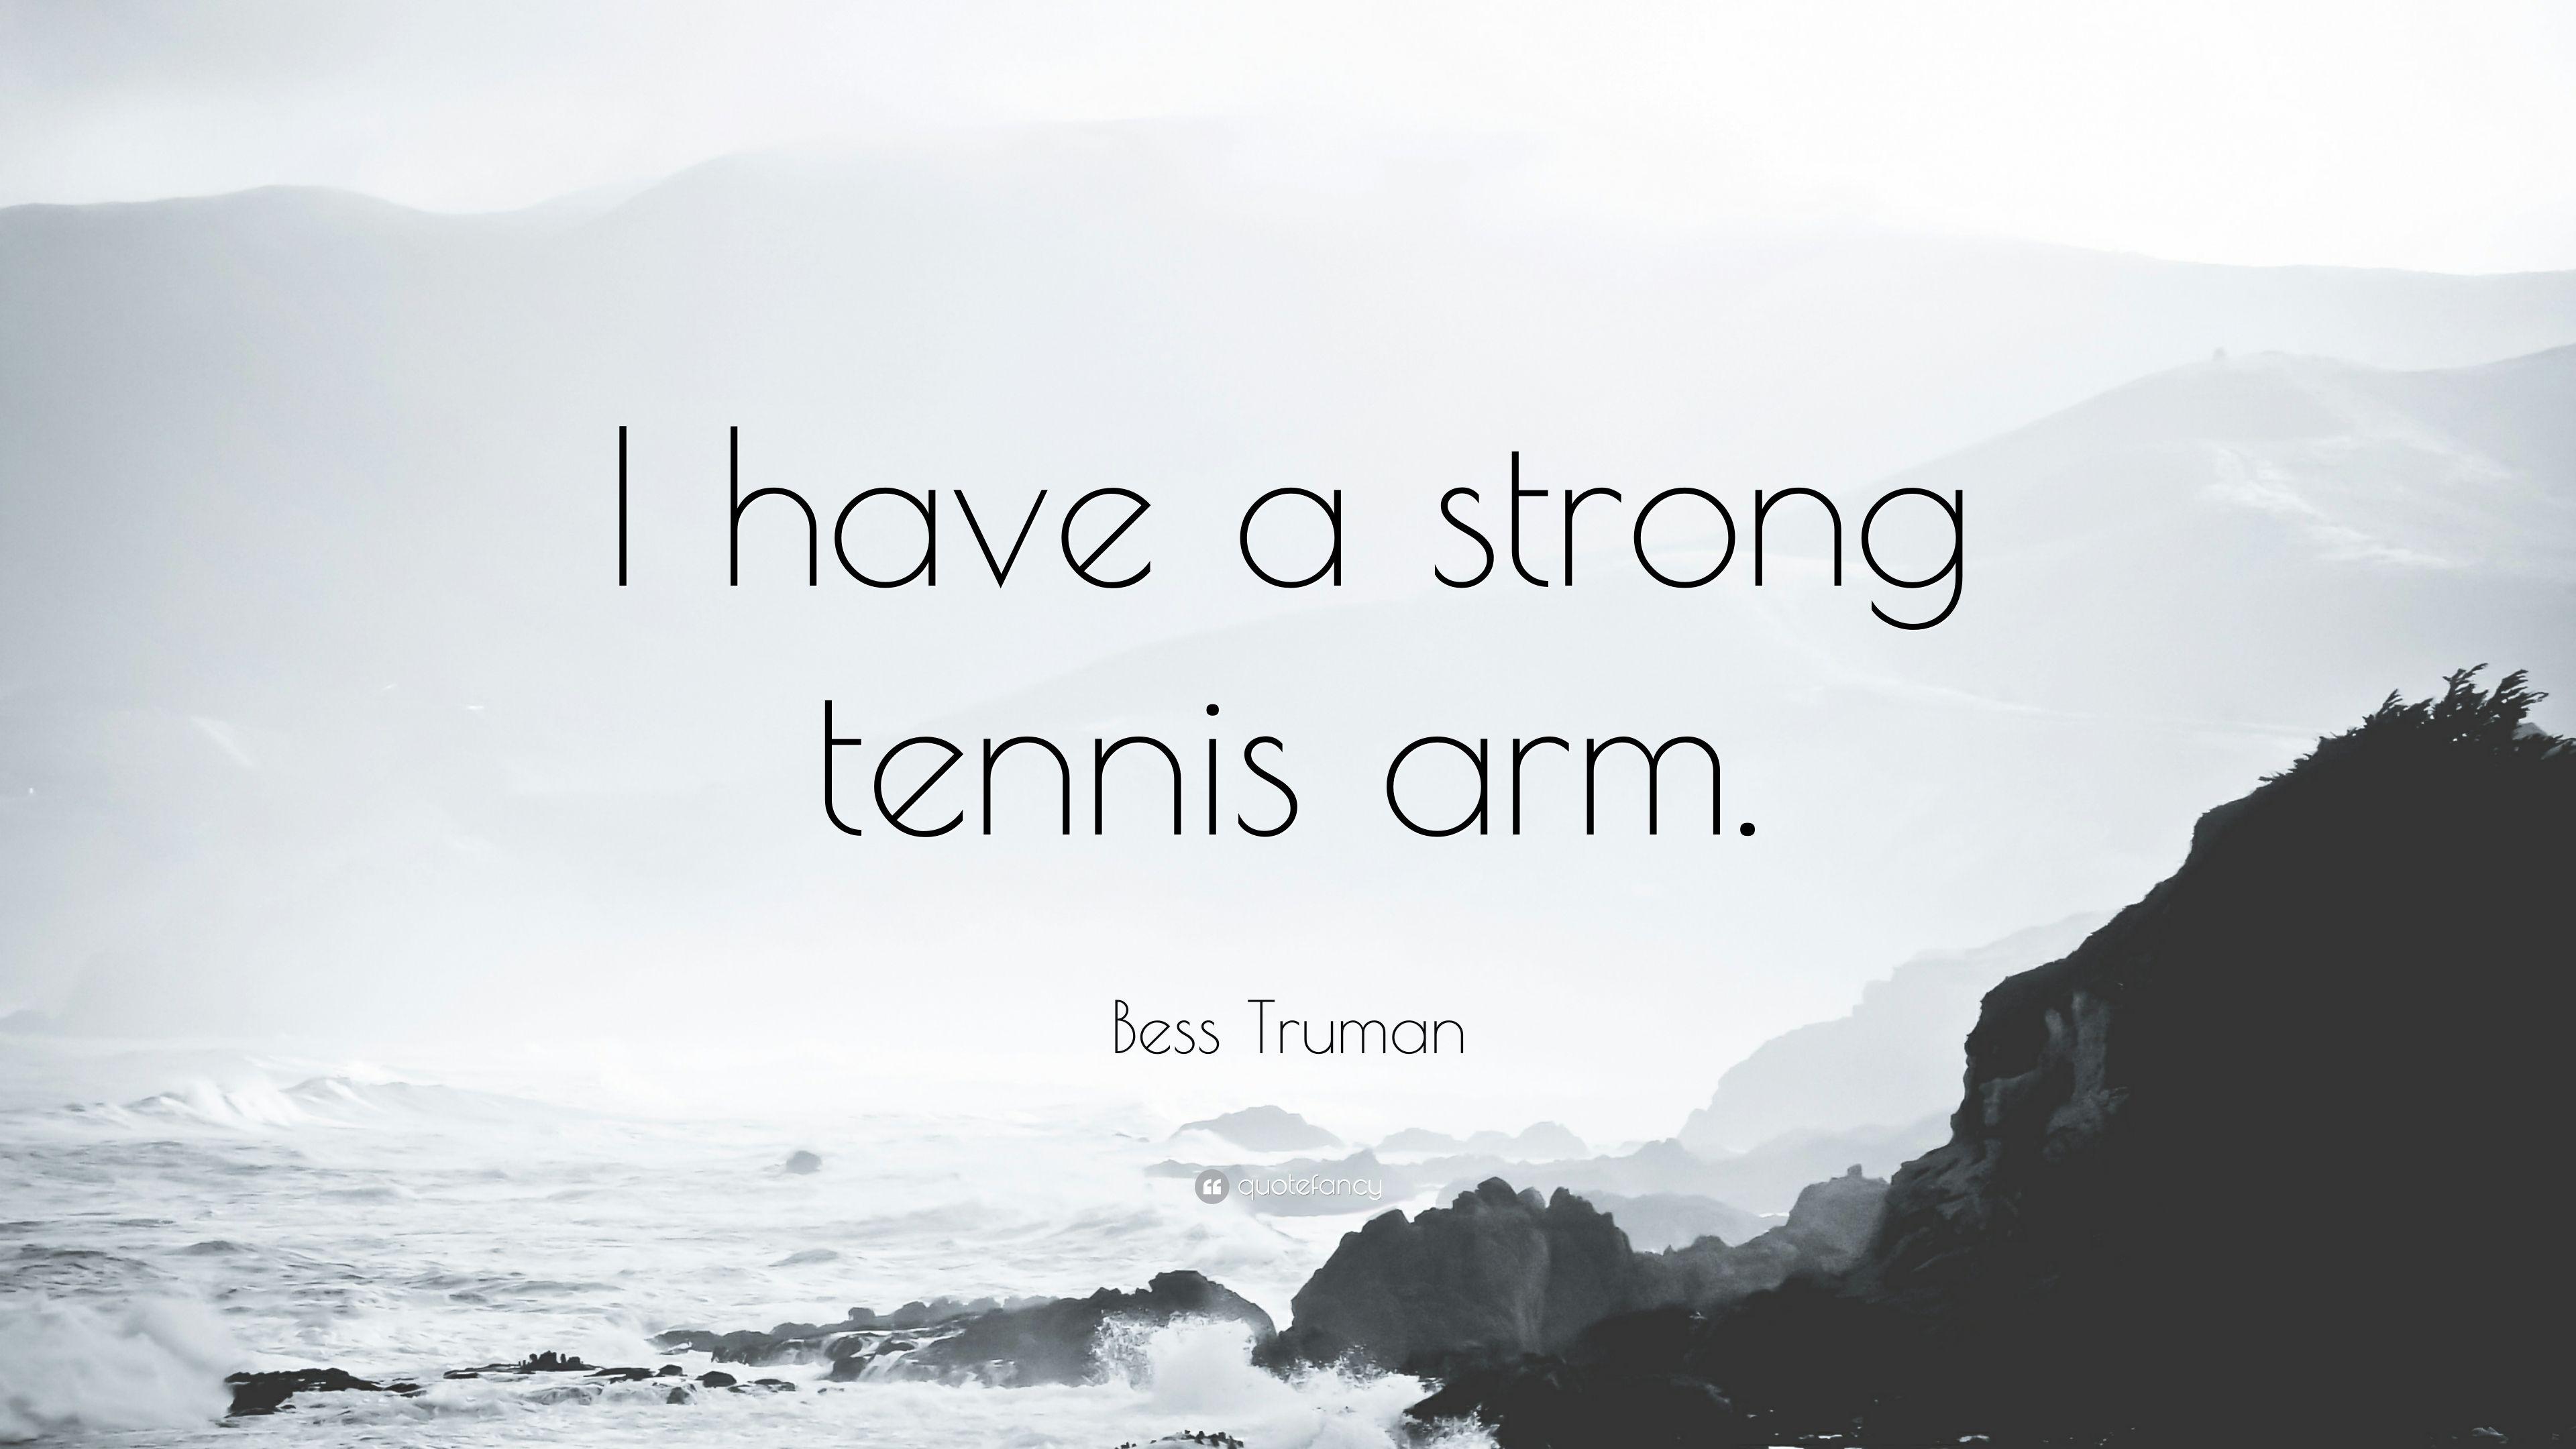 Bess Truman Quote: “I have a strong tennis arm.” 7 wallpaper